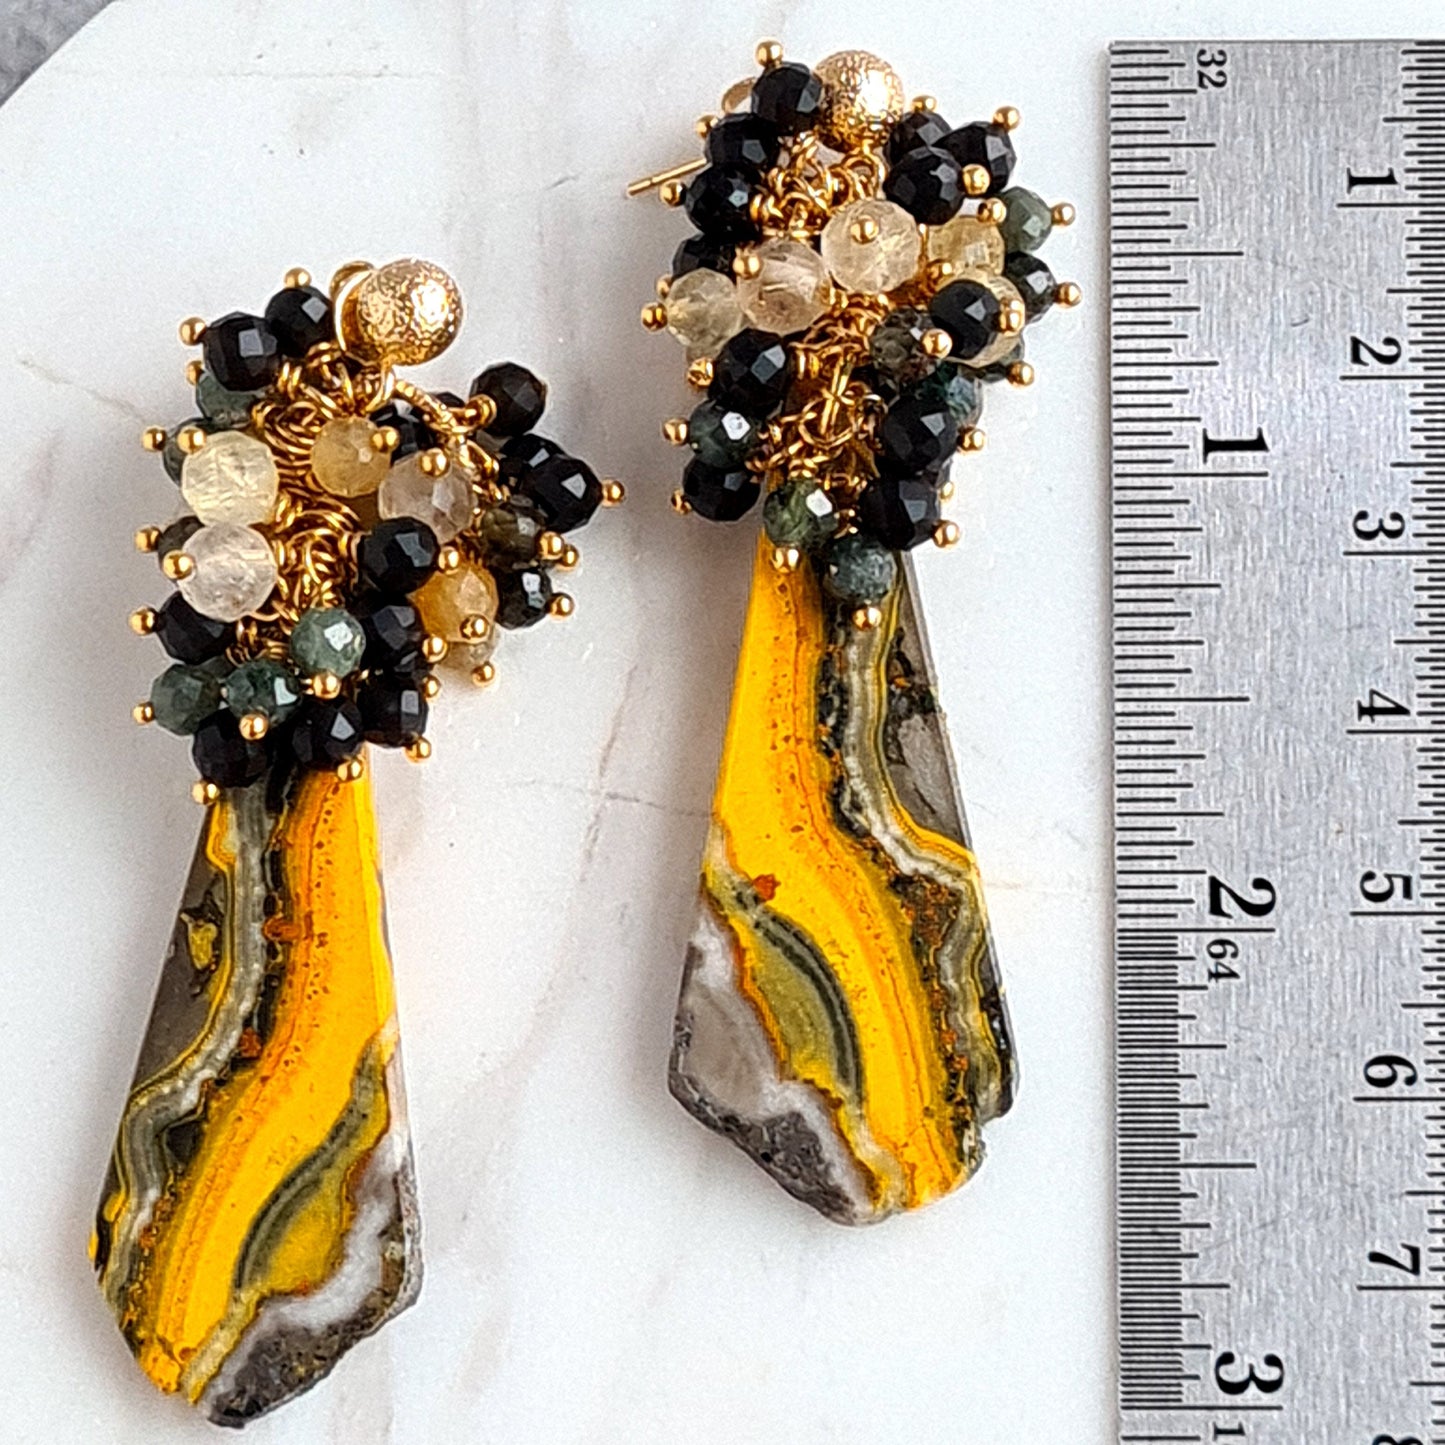 Bumble Bee Jasper with Cluster of Golden Obsidian, Blue Tourmaline, Golden Rutile & Citrine